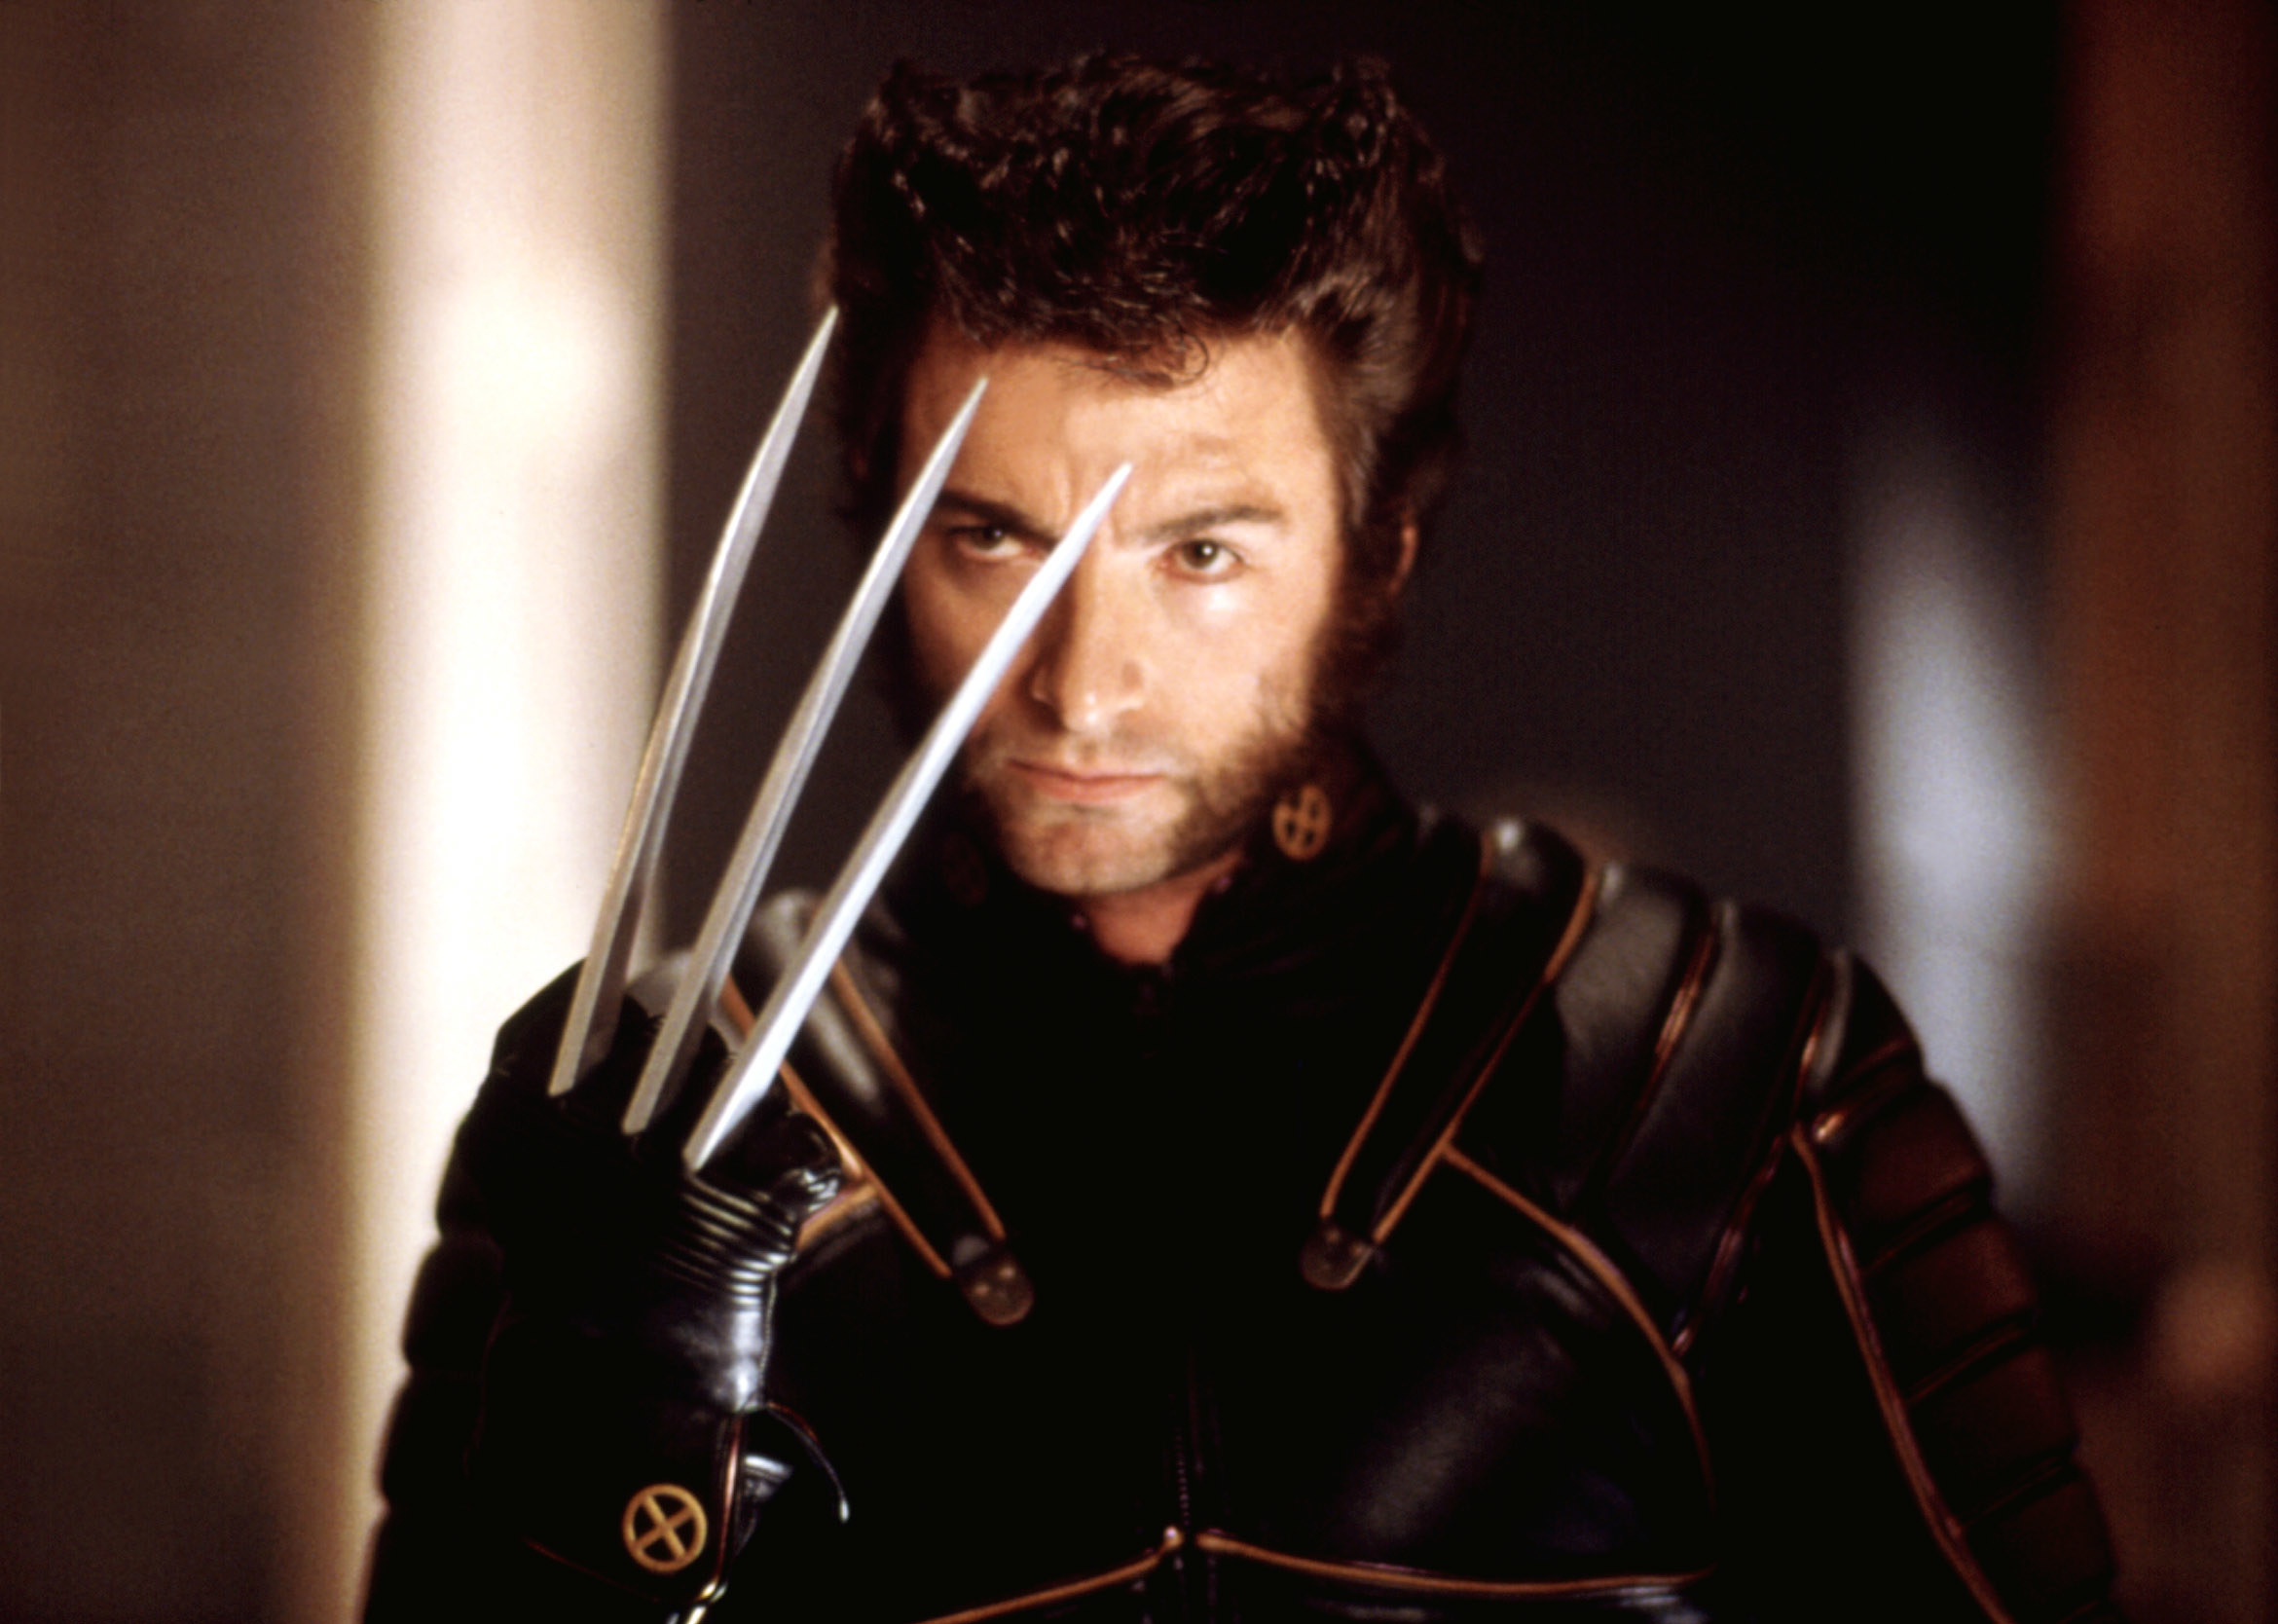 wolverine with his claws out